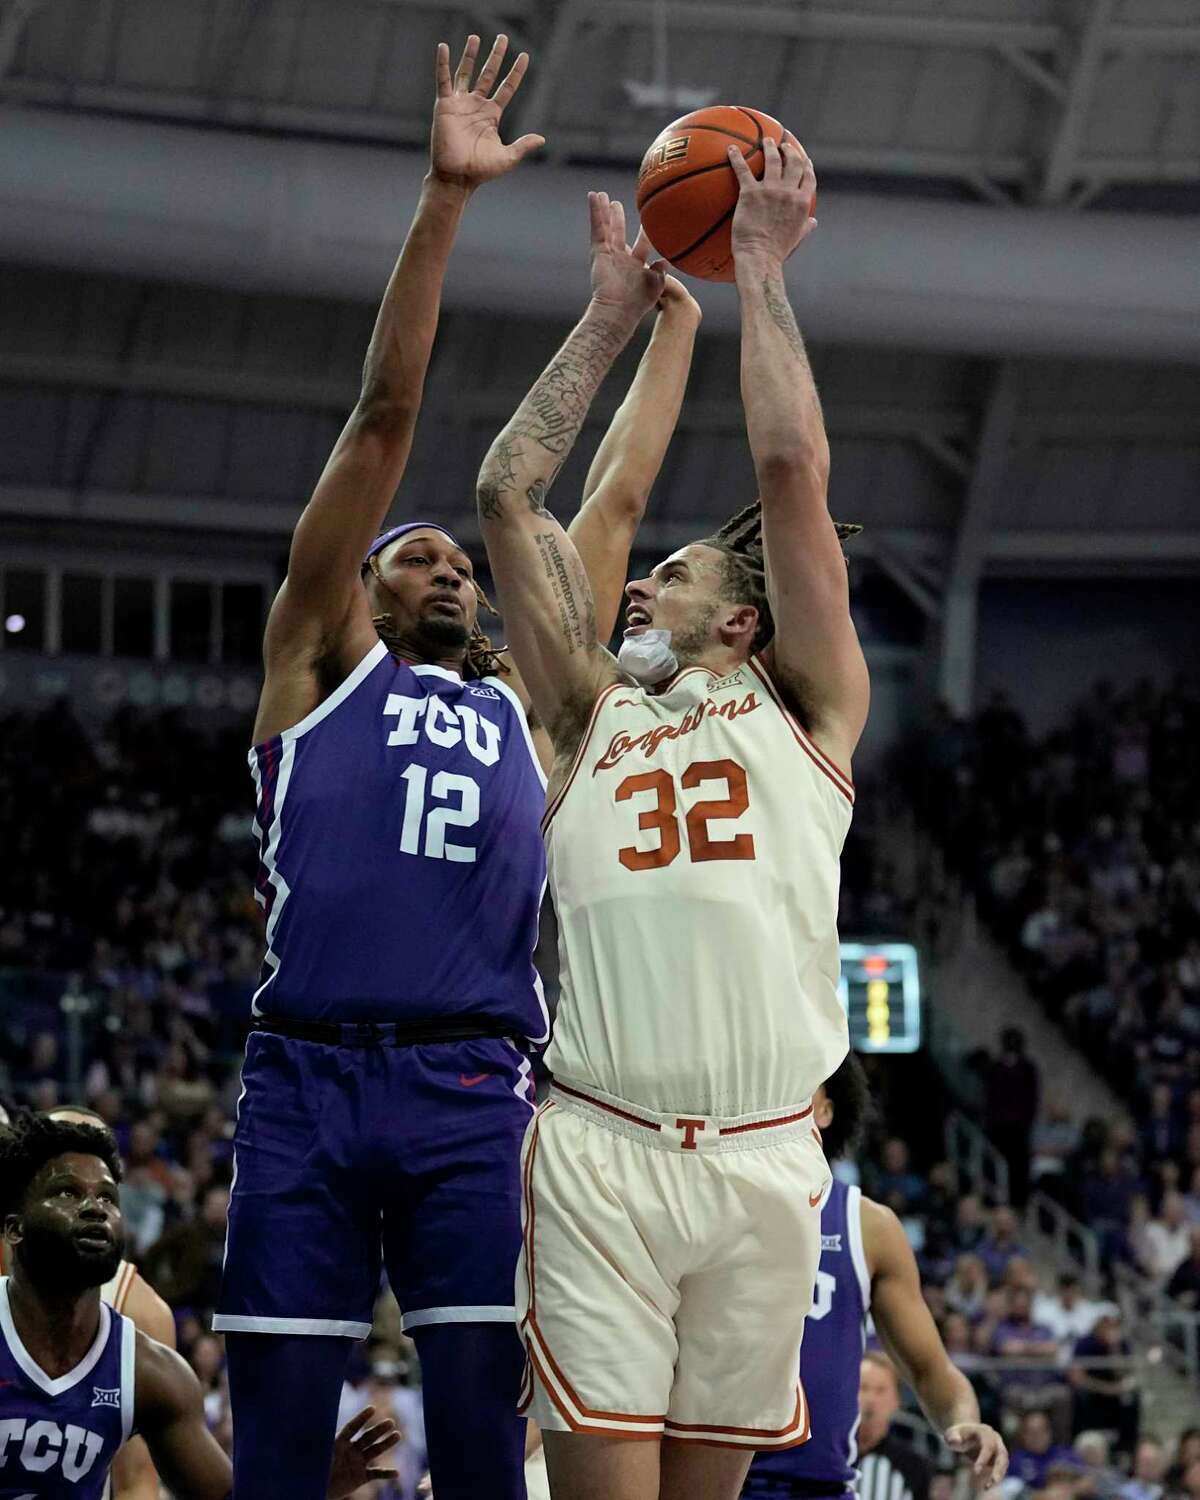 TCU forward Xavier Cork (12) defends against a shot by Texas's Christian Bishop (32) in the first half of an NCAA college basketball game, Wednesday, March 1, 2023, in Fort Worth Texas. (AP Photo/Tony Gutierrez)